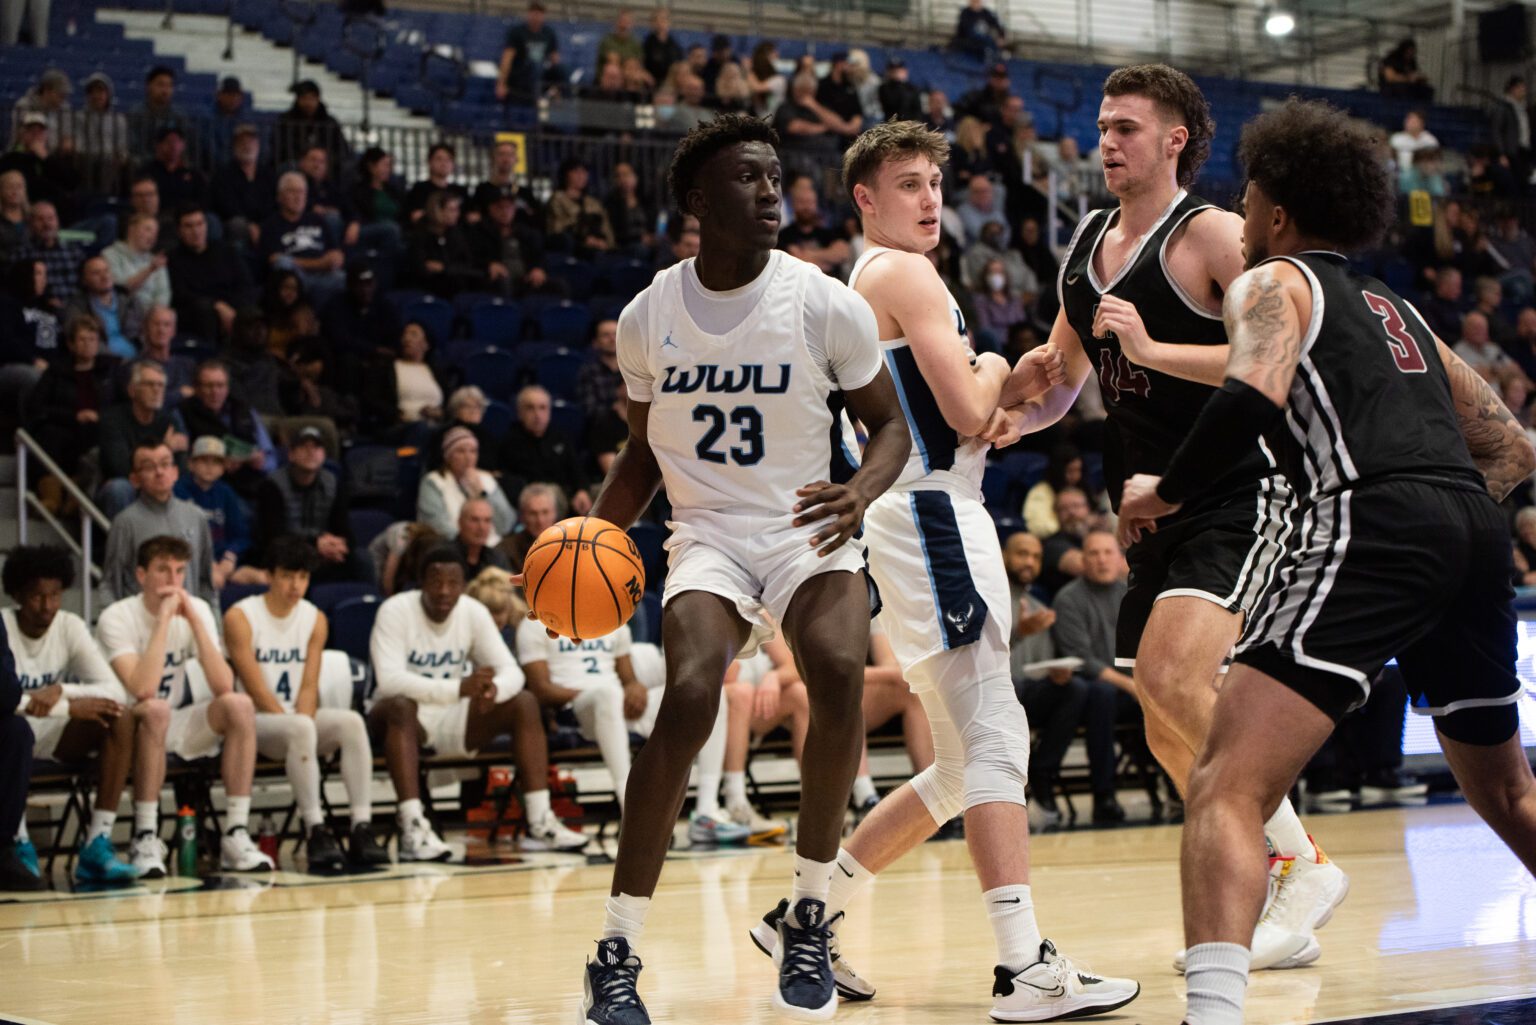 Western Washington University freshman forward BJ Kolly looks to pass the ball during a 90-73 loss Jan. 7 against Seattle Pacific University. Kolly was selected as the Great Northwest Athletic Conference Freshman of the Year